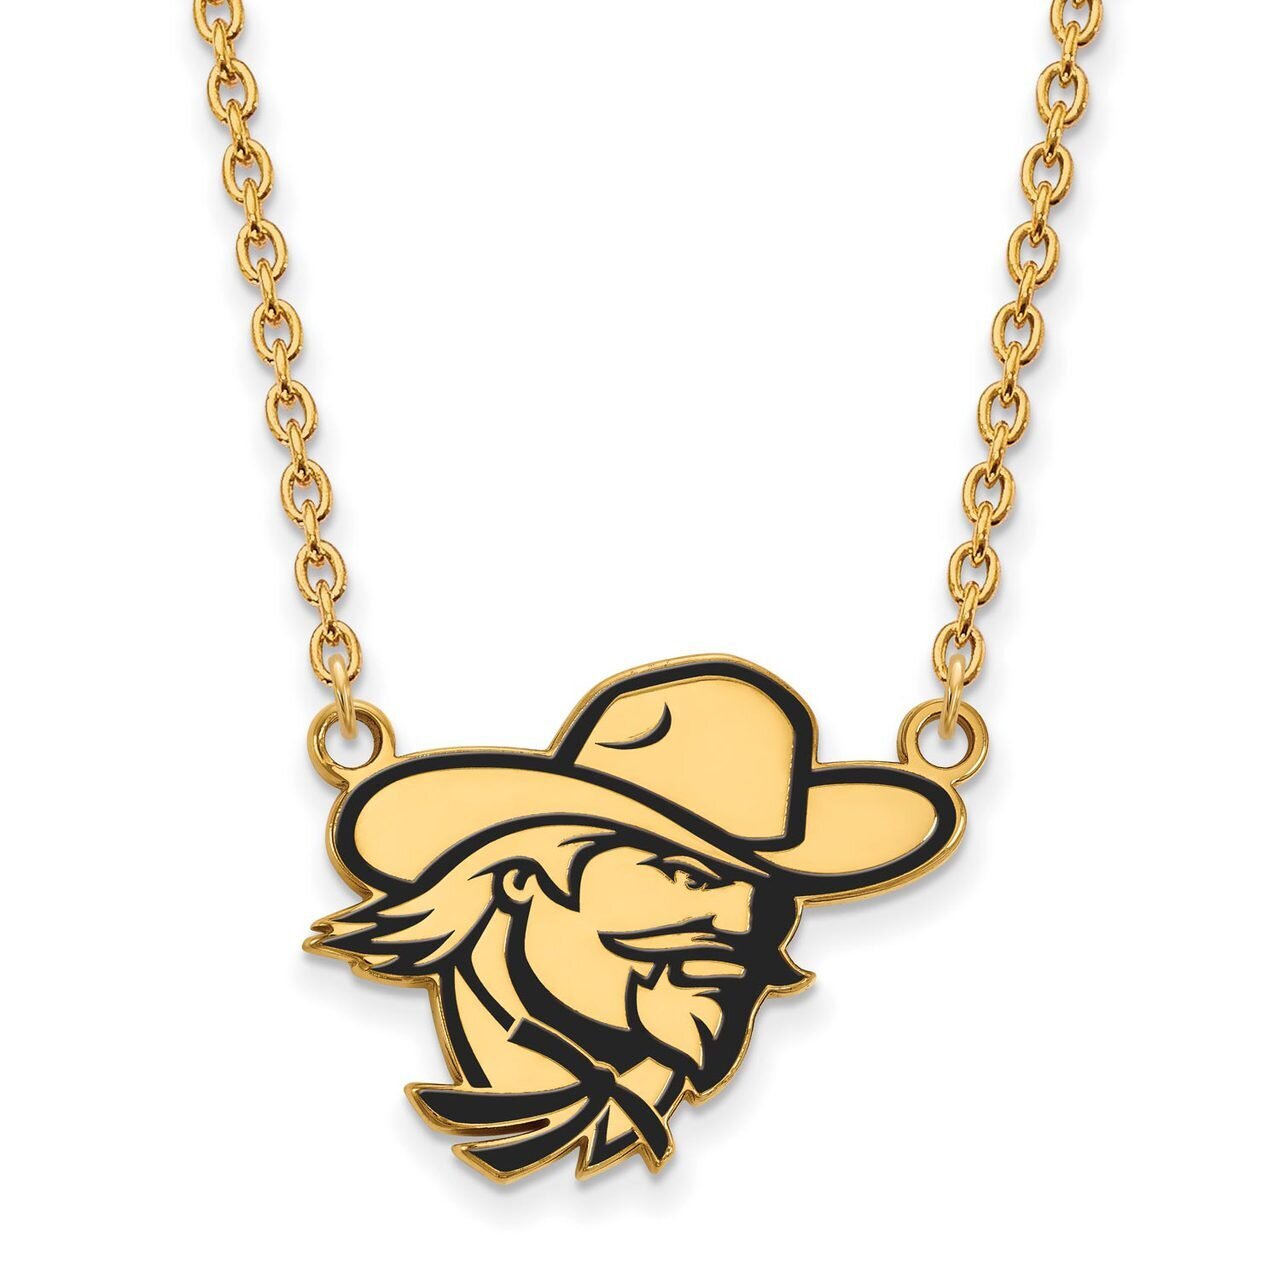 Eastern Kentucky University Large Enamel Pendant with Chain Necklace Gold-plated Silver GP021EKU-18